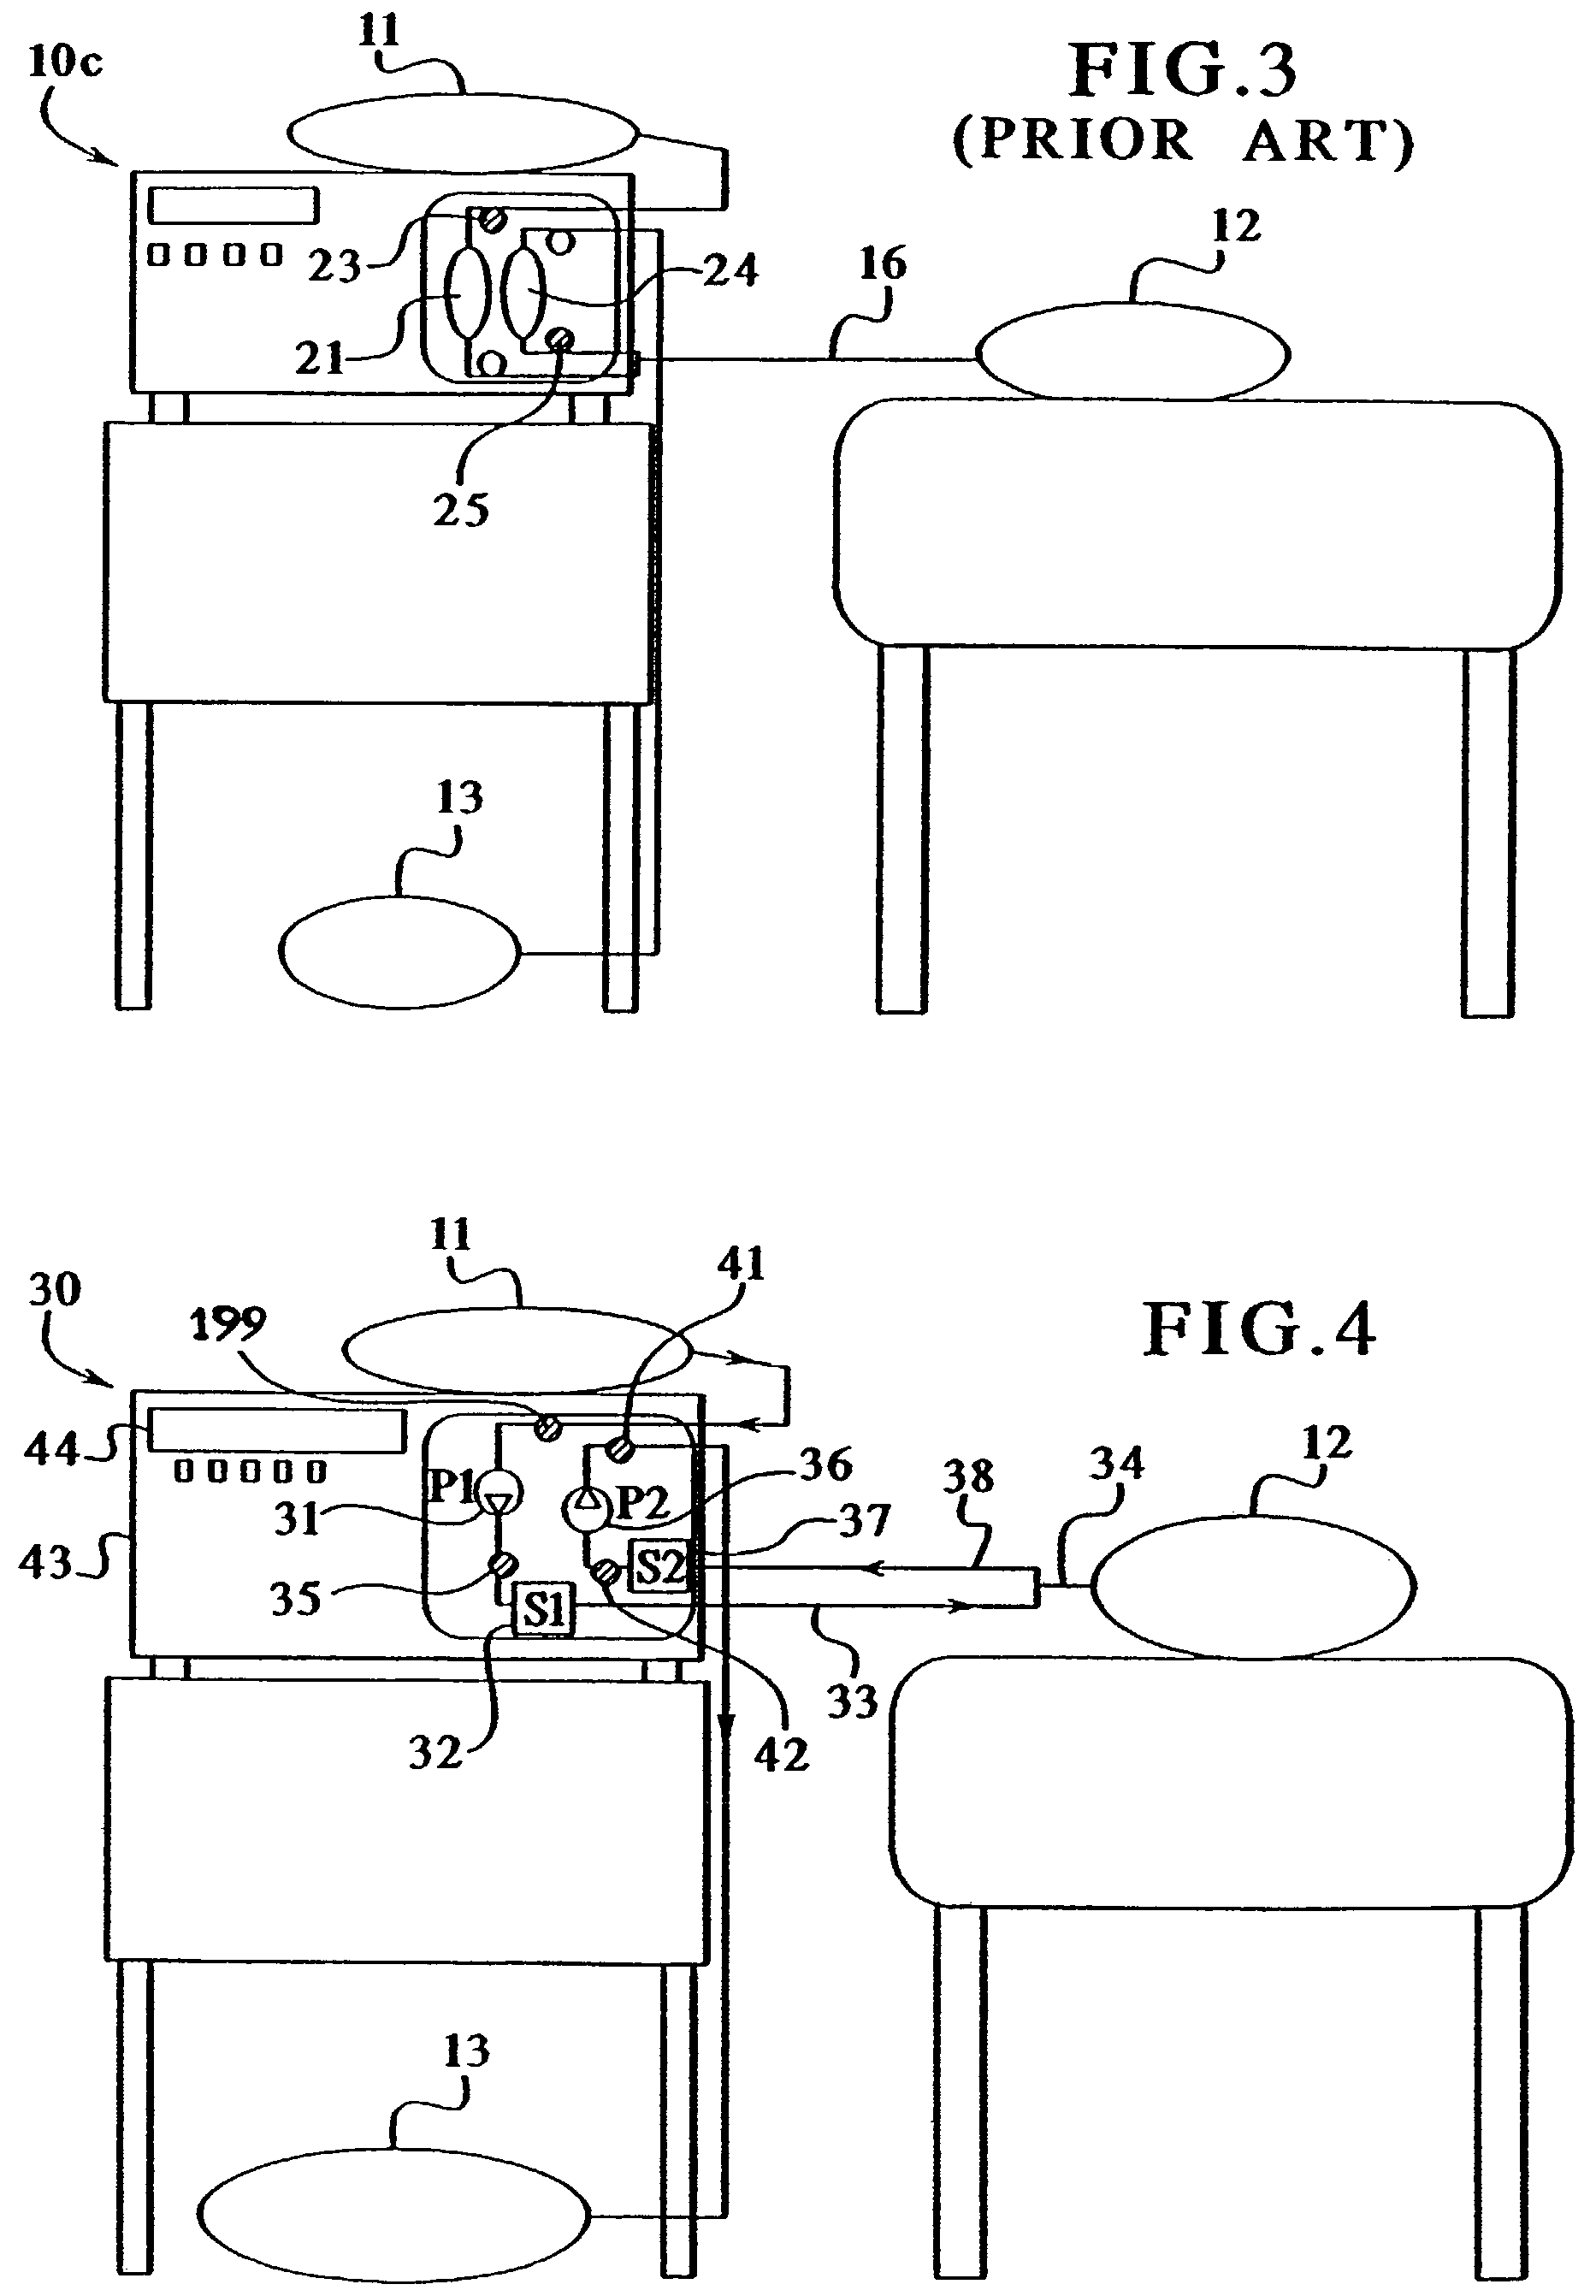 Method for monitoring and controlling peritoneal dialysis therapy